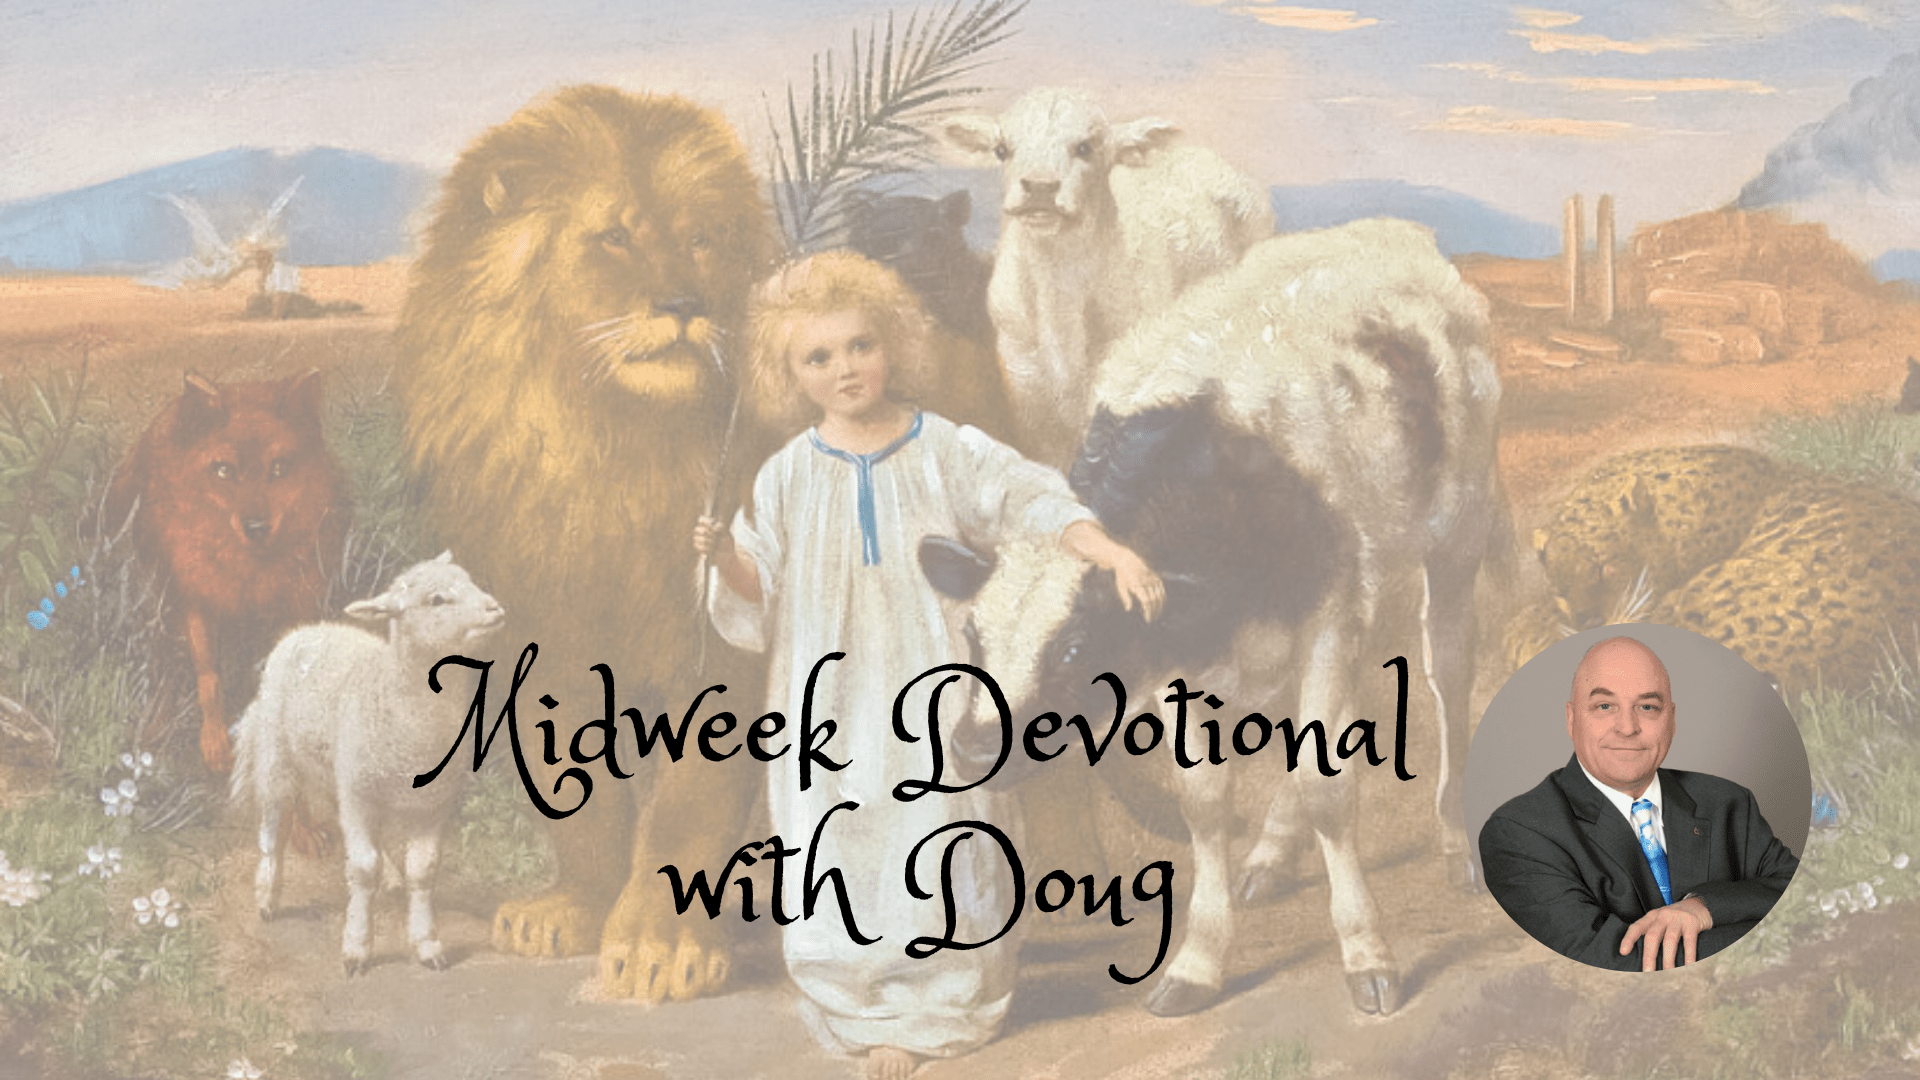 Midweek Devotional with Doug for third week of July